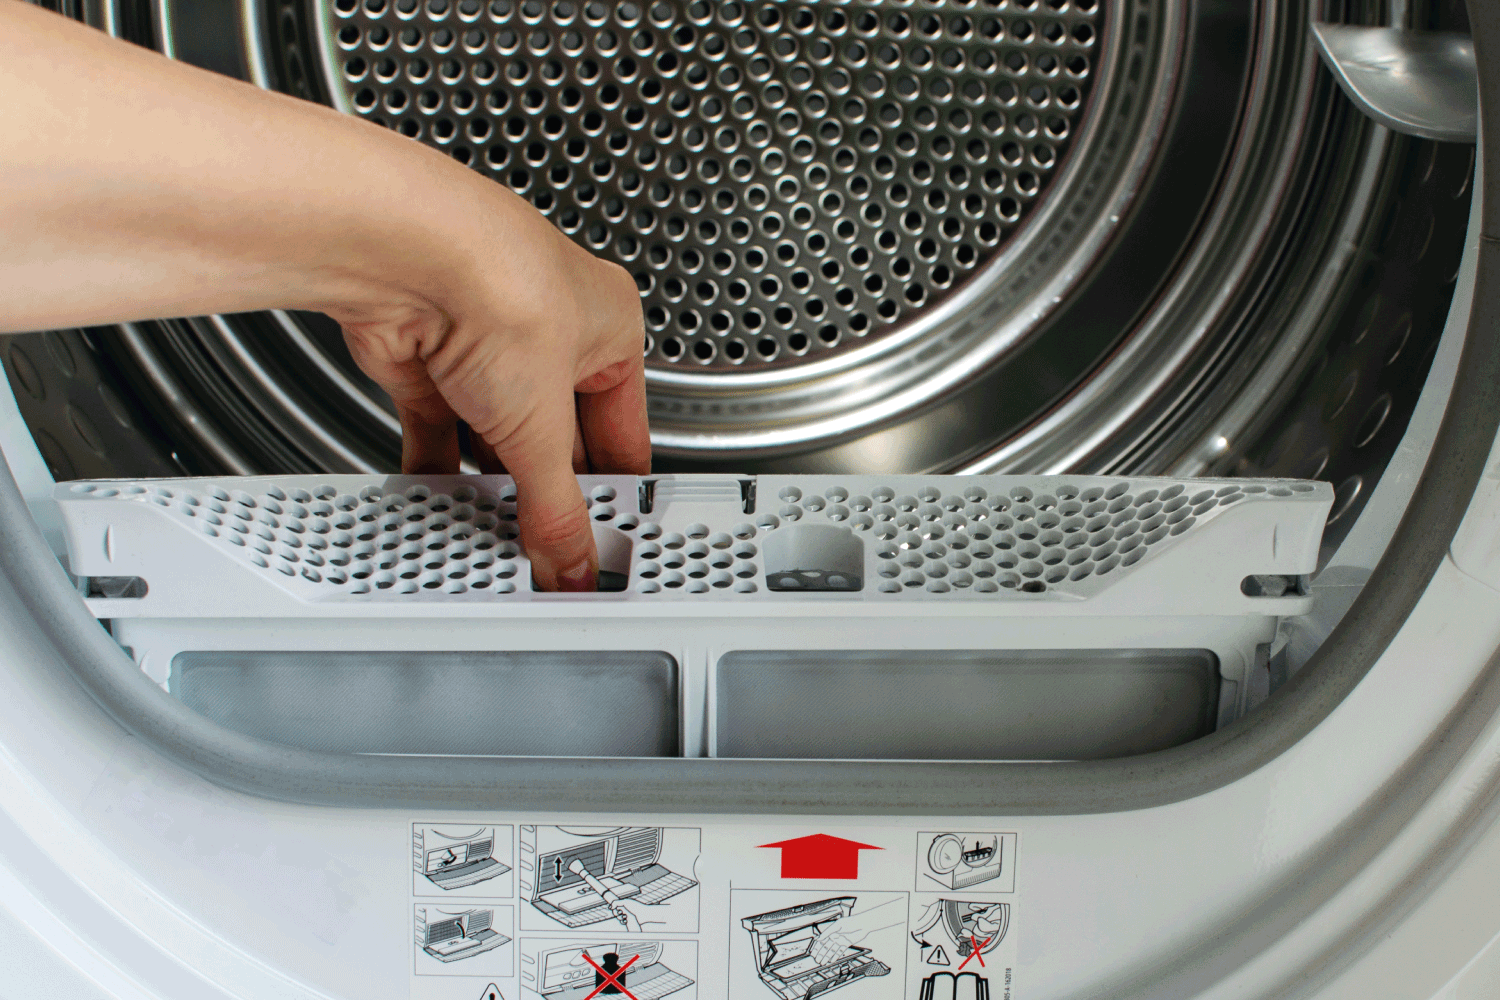 A housewife holds a lint trap from a front-loading tumble dryer. Woman's hand